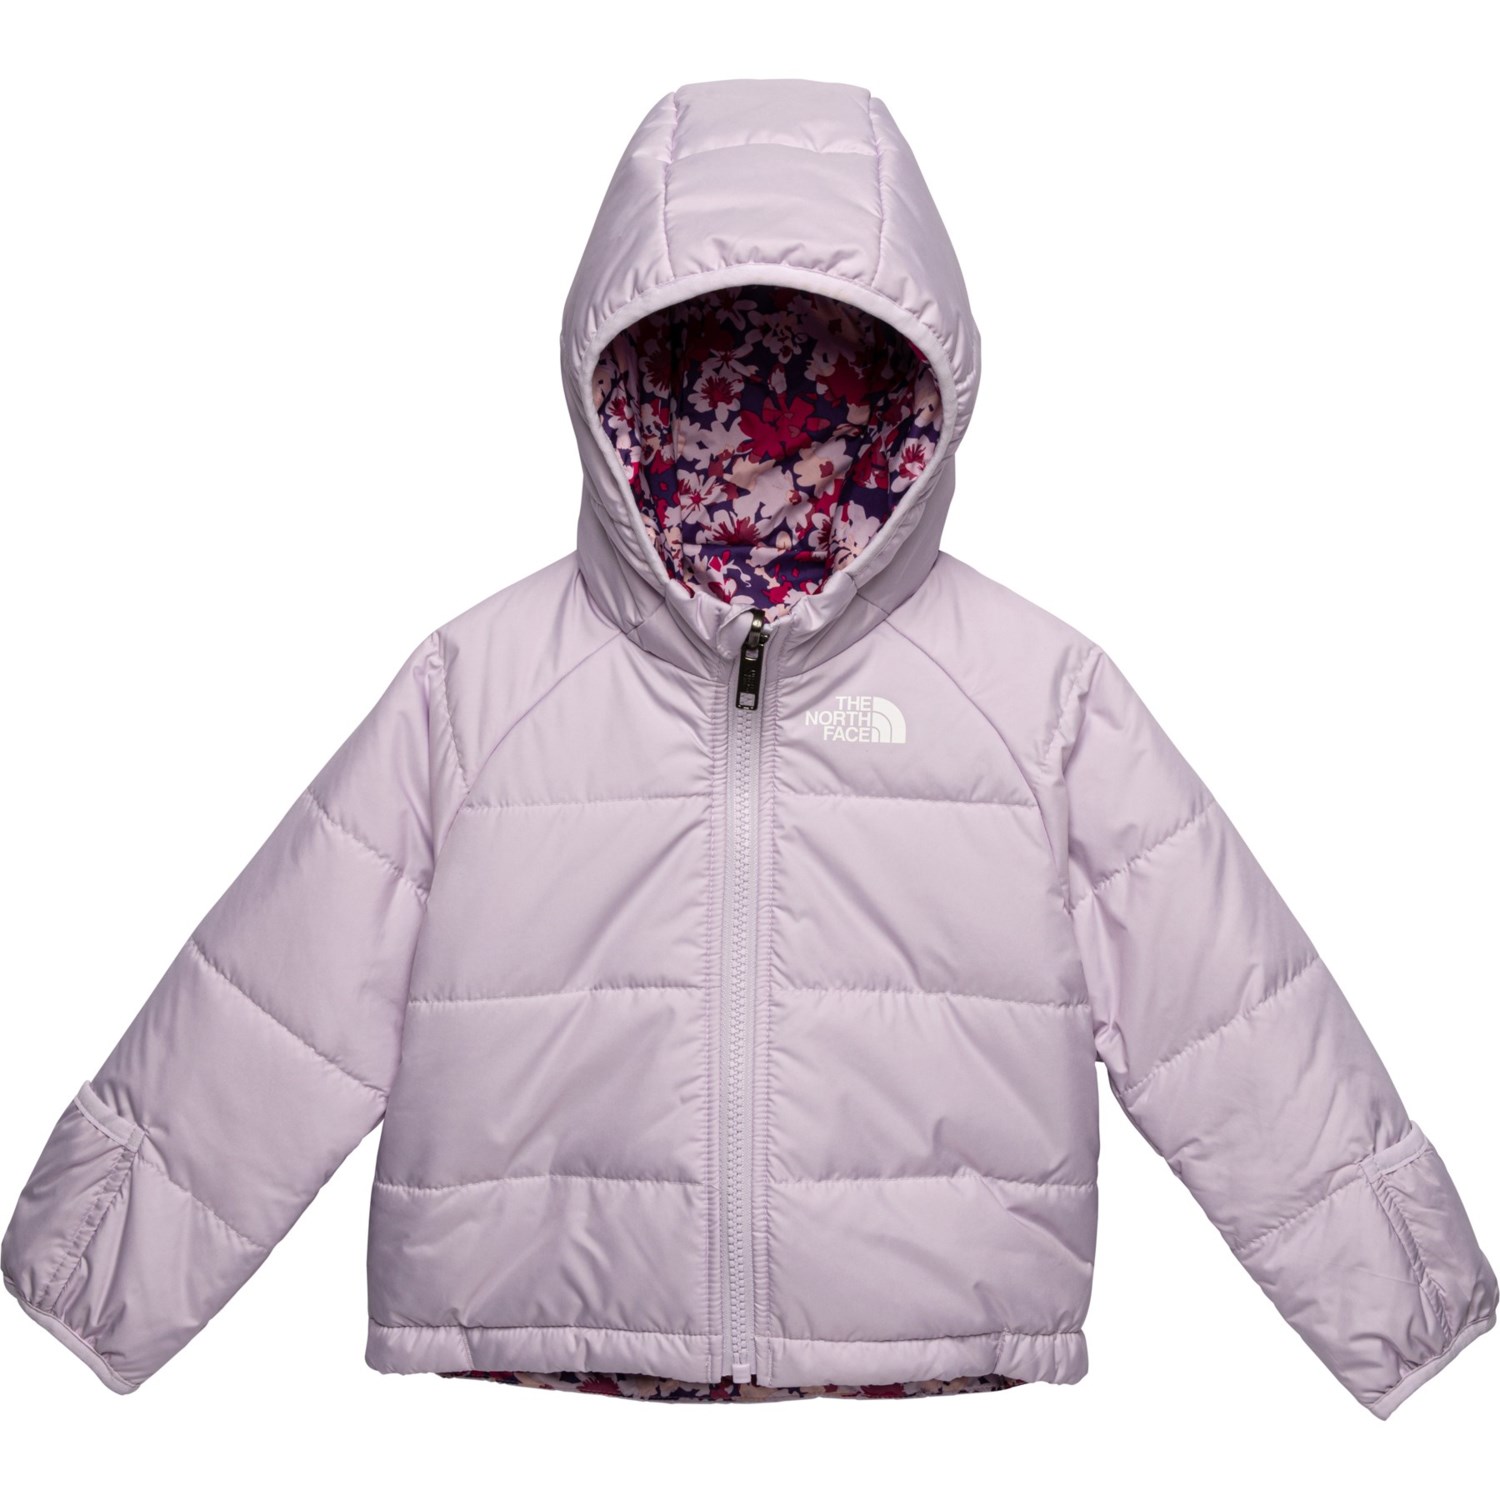 The North Face Girls Jacket - Insulated Reversible, Perrito Hooded Infant